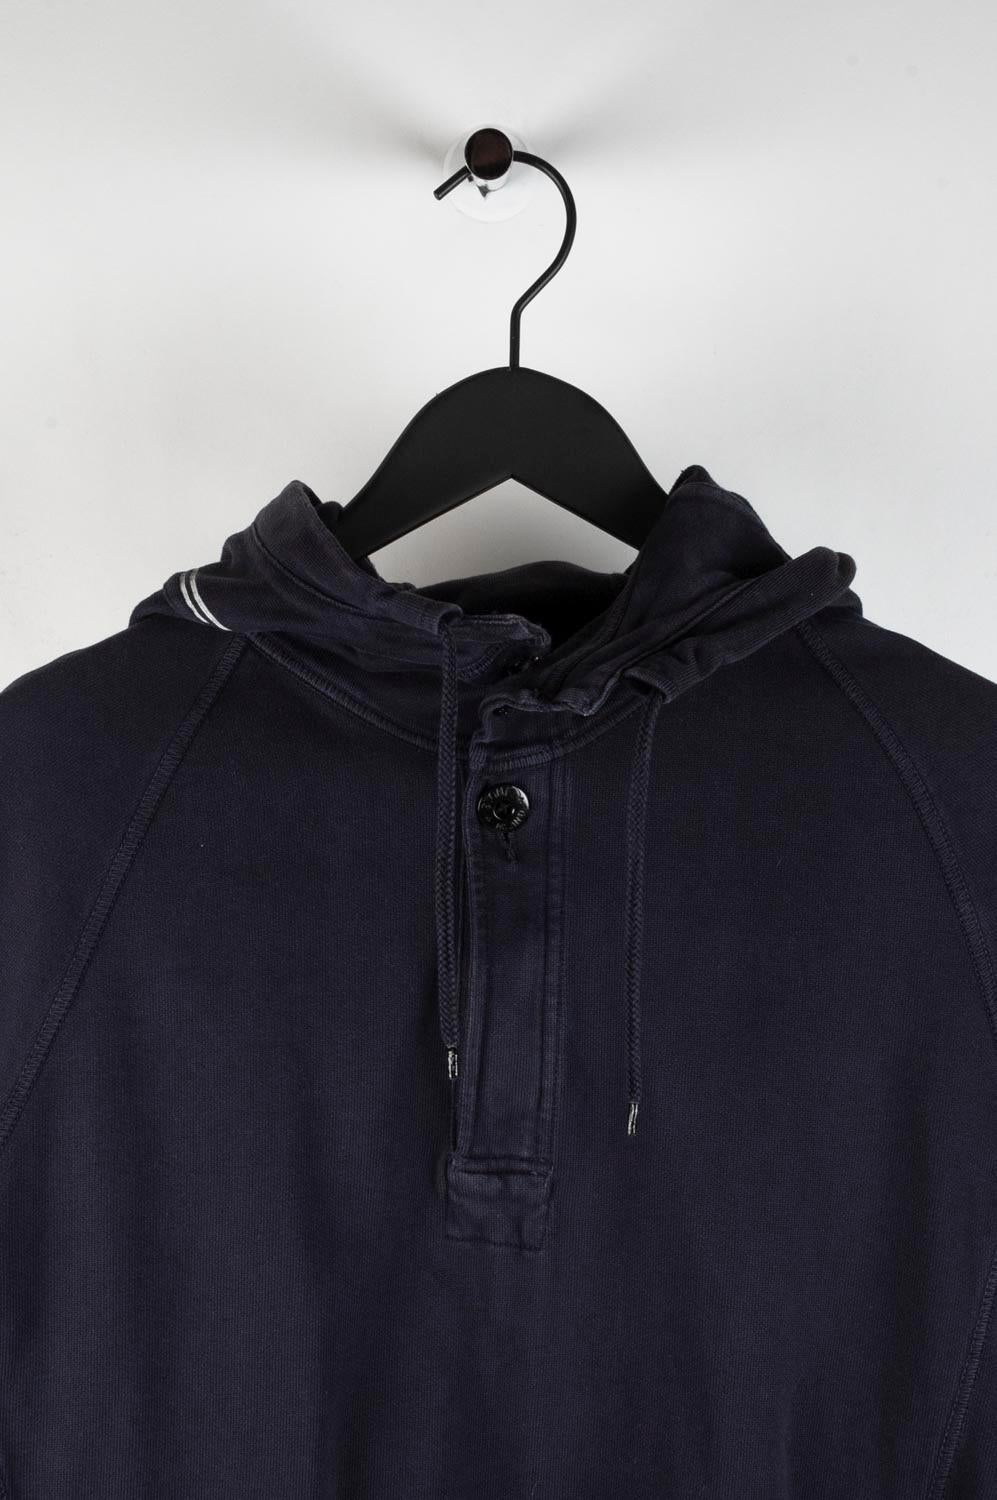 Item for sale is 100% genuine Stone Island Jumper Hoodie with buttons and zip to close
Color: Navy
(An actual color may a bit vary due to individual computer screen interpretation)
Material: 100% cotton
Tag size: L runs for Medium too check